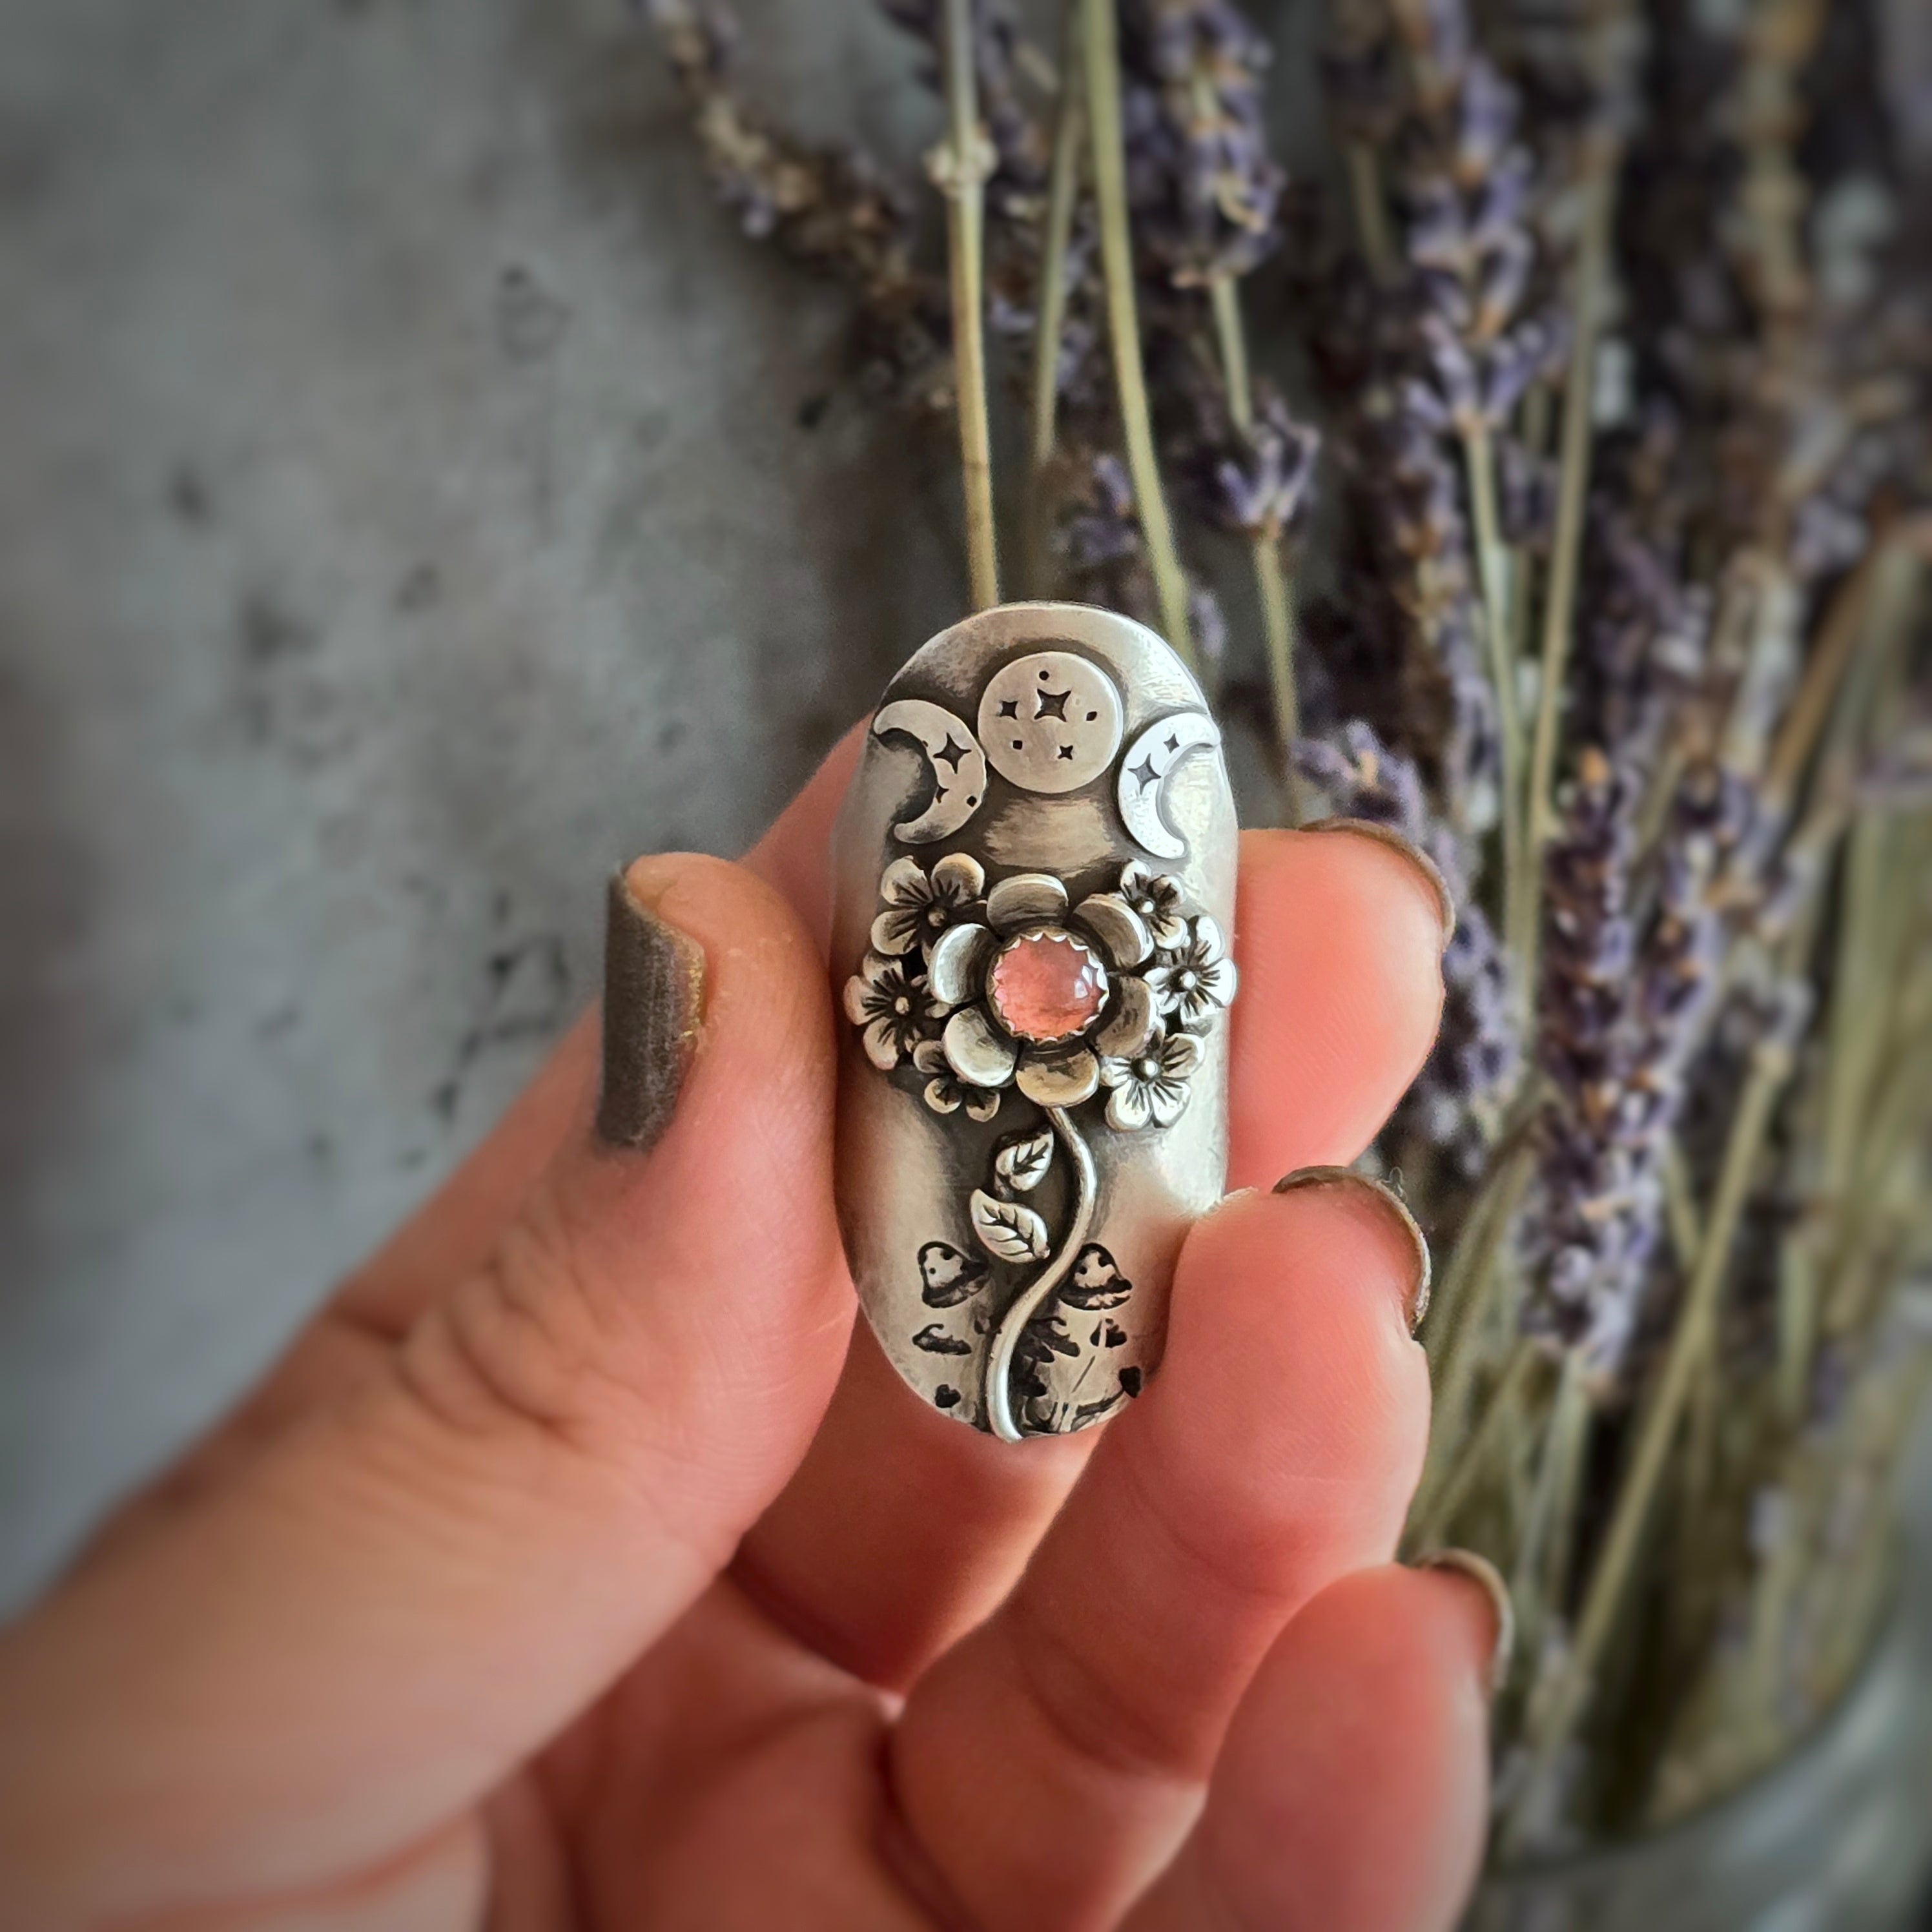 The image shows a hand holding a unique, intricately designed silver ring depicting a goddess figure adorned with floral and celestial elements. The ring features a pink tourmaline stone as the centerpiece, resembling a blooming flower. Surrounding the central stone are delicate cherry blossom flowers and triple moon phase symbols, adding to the ring's ethereal and mystical aesthetic.